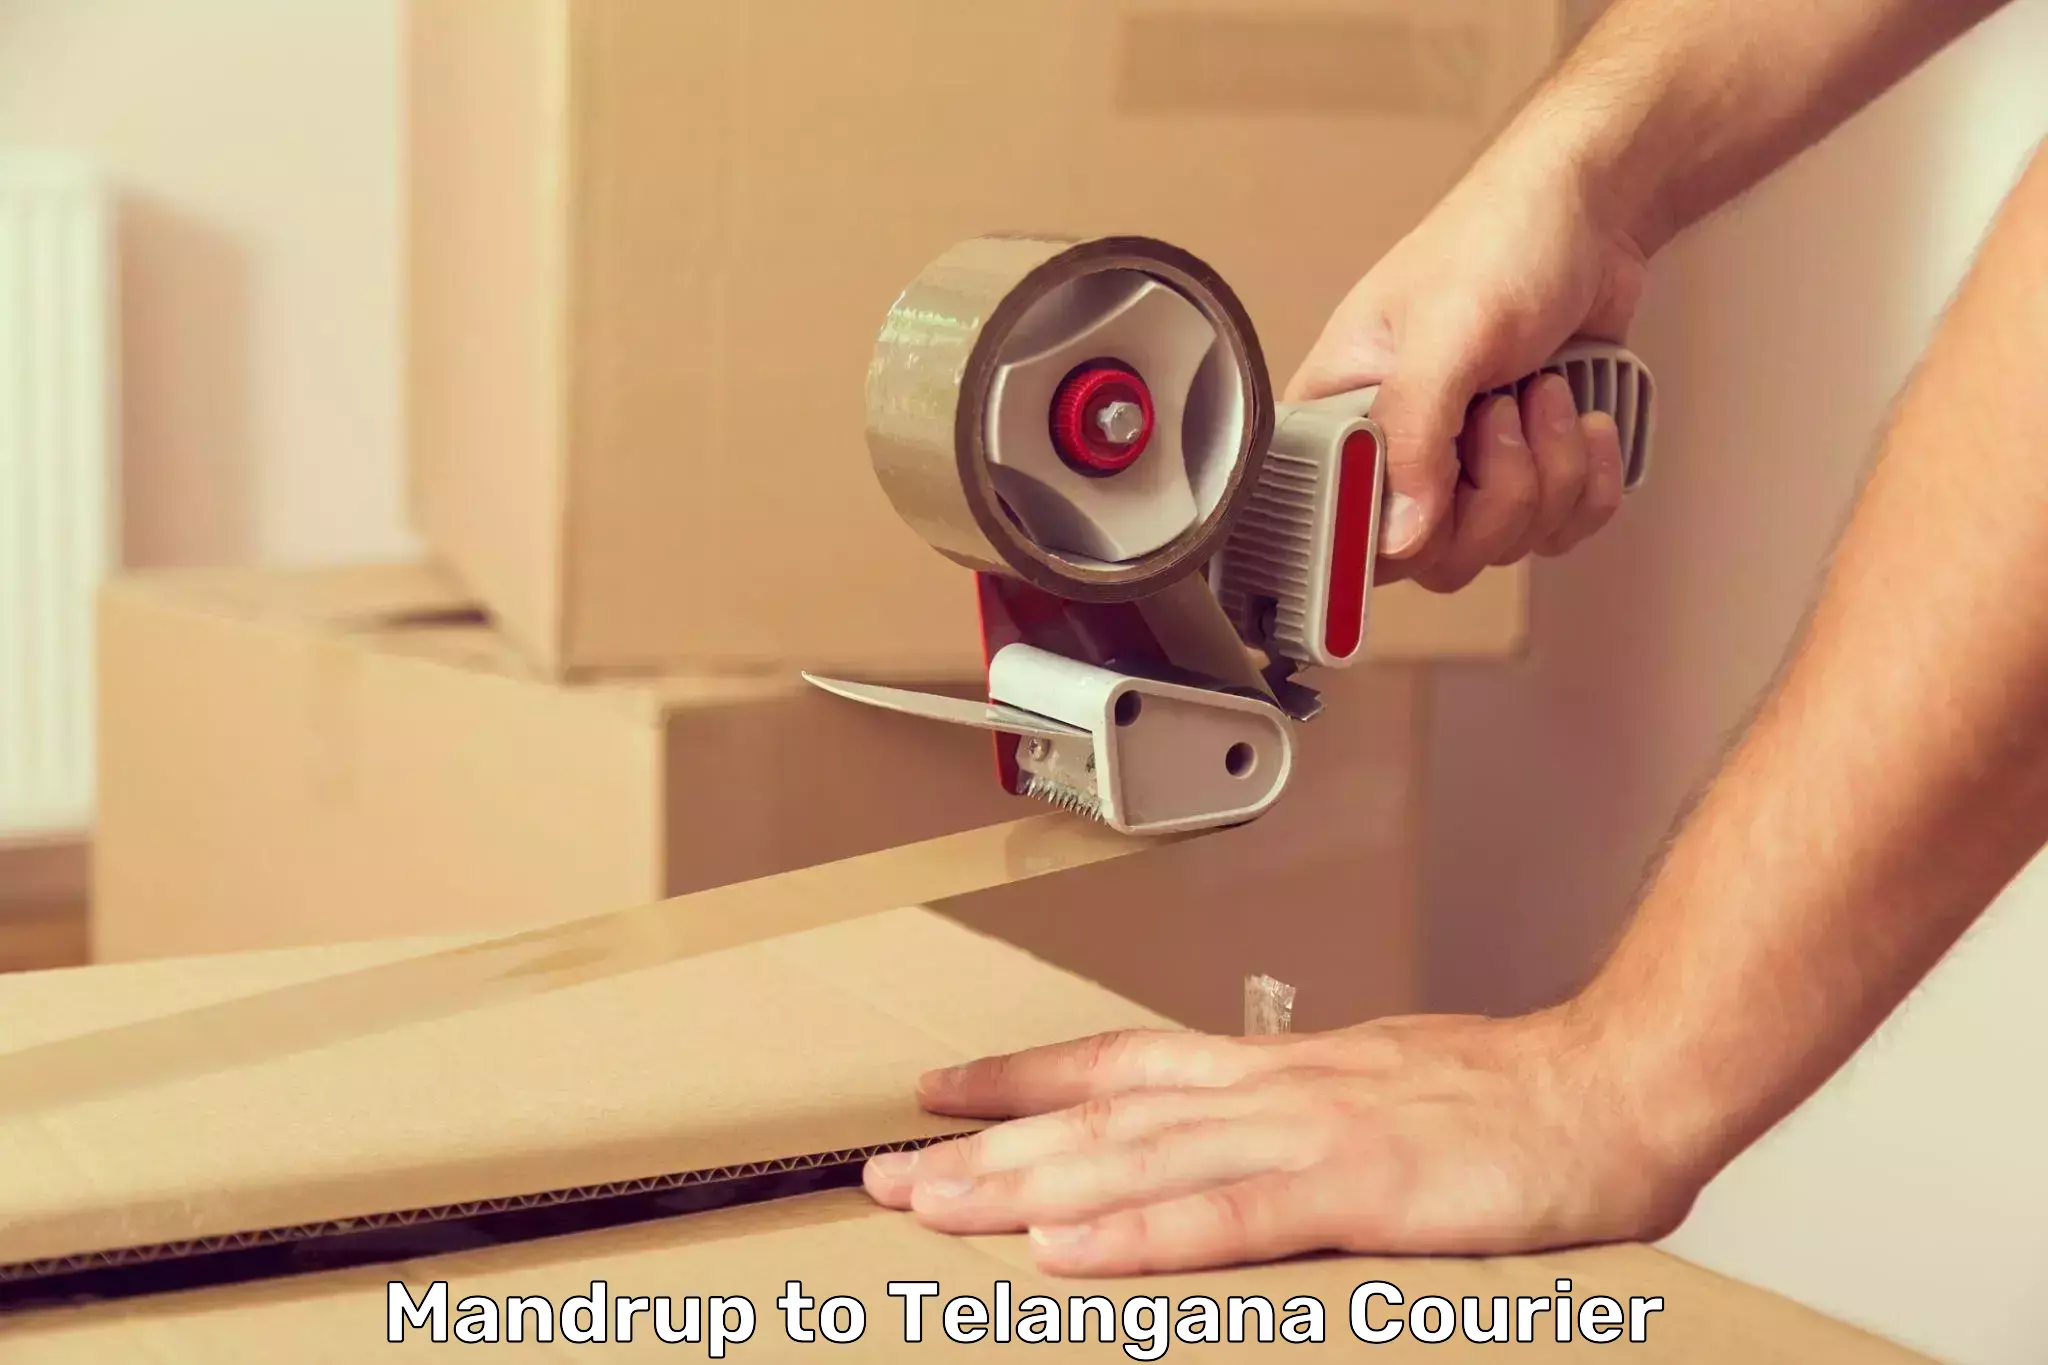 Discount courier rates Mandrup to Telangana